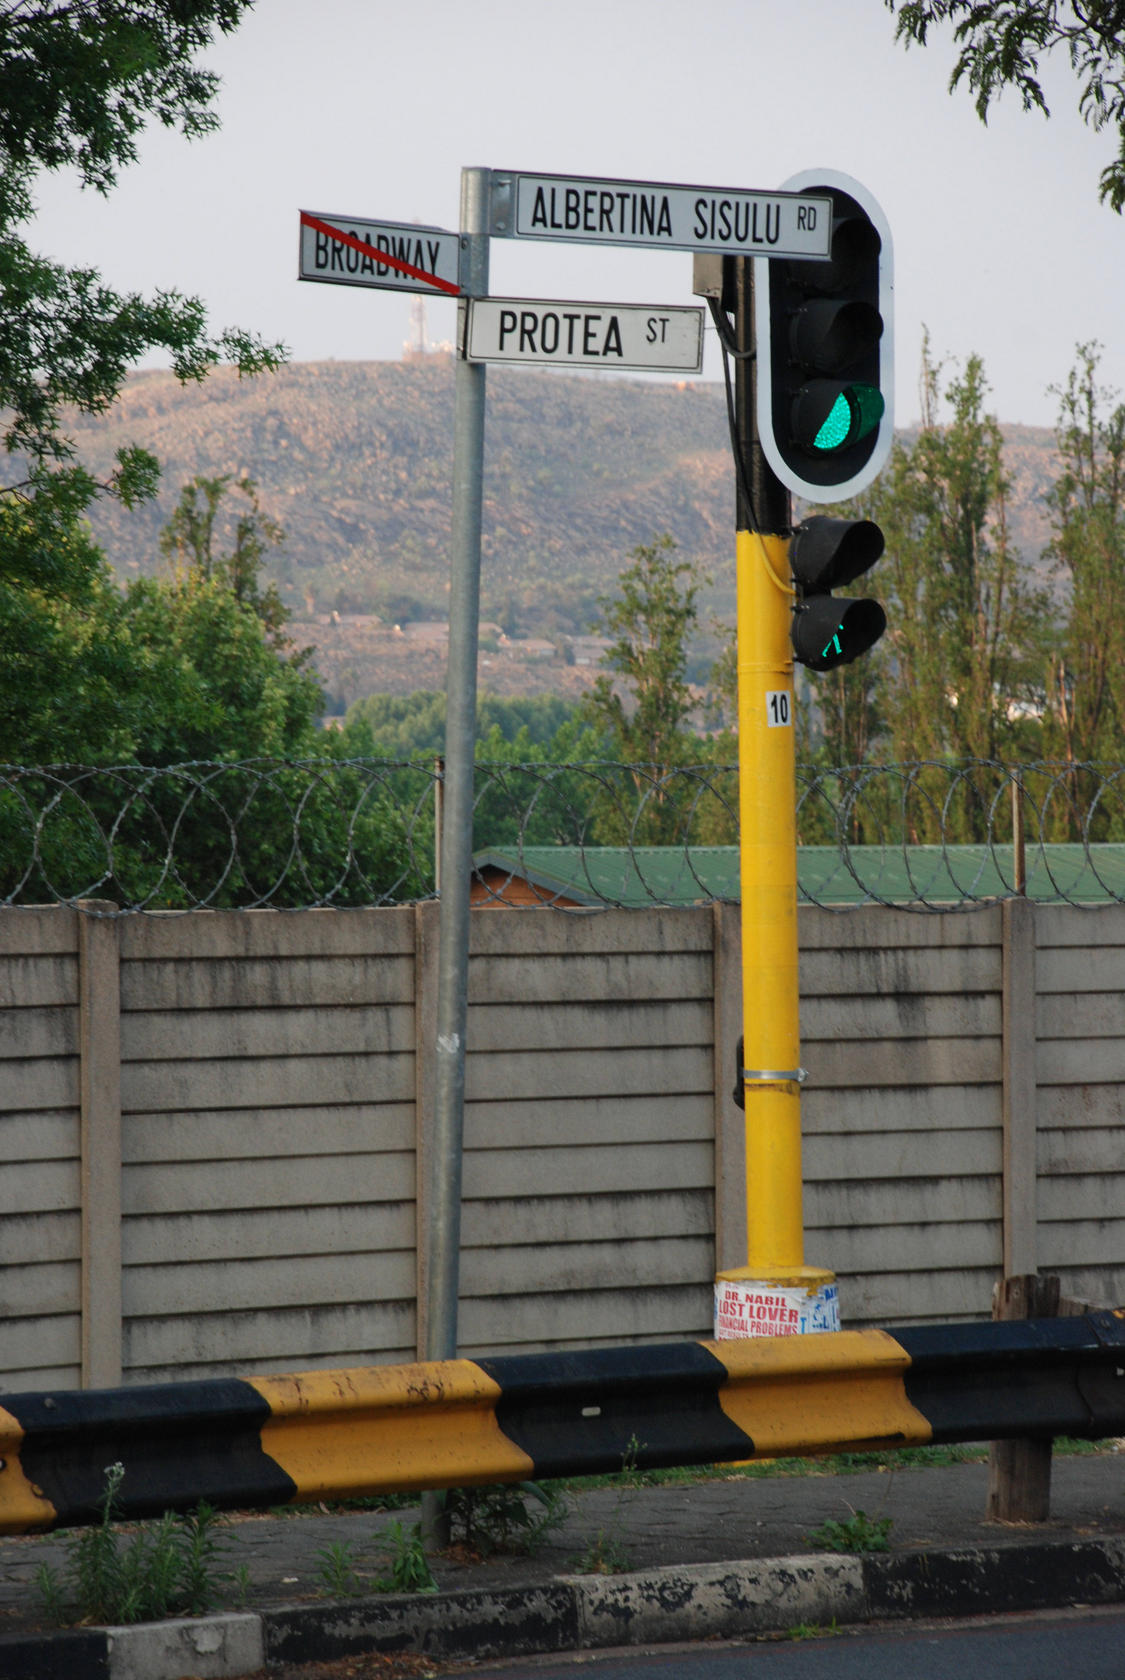 South African street names have been changed to reflect the modern era.